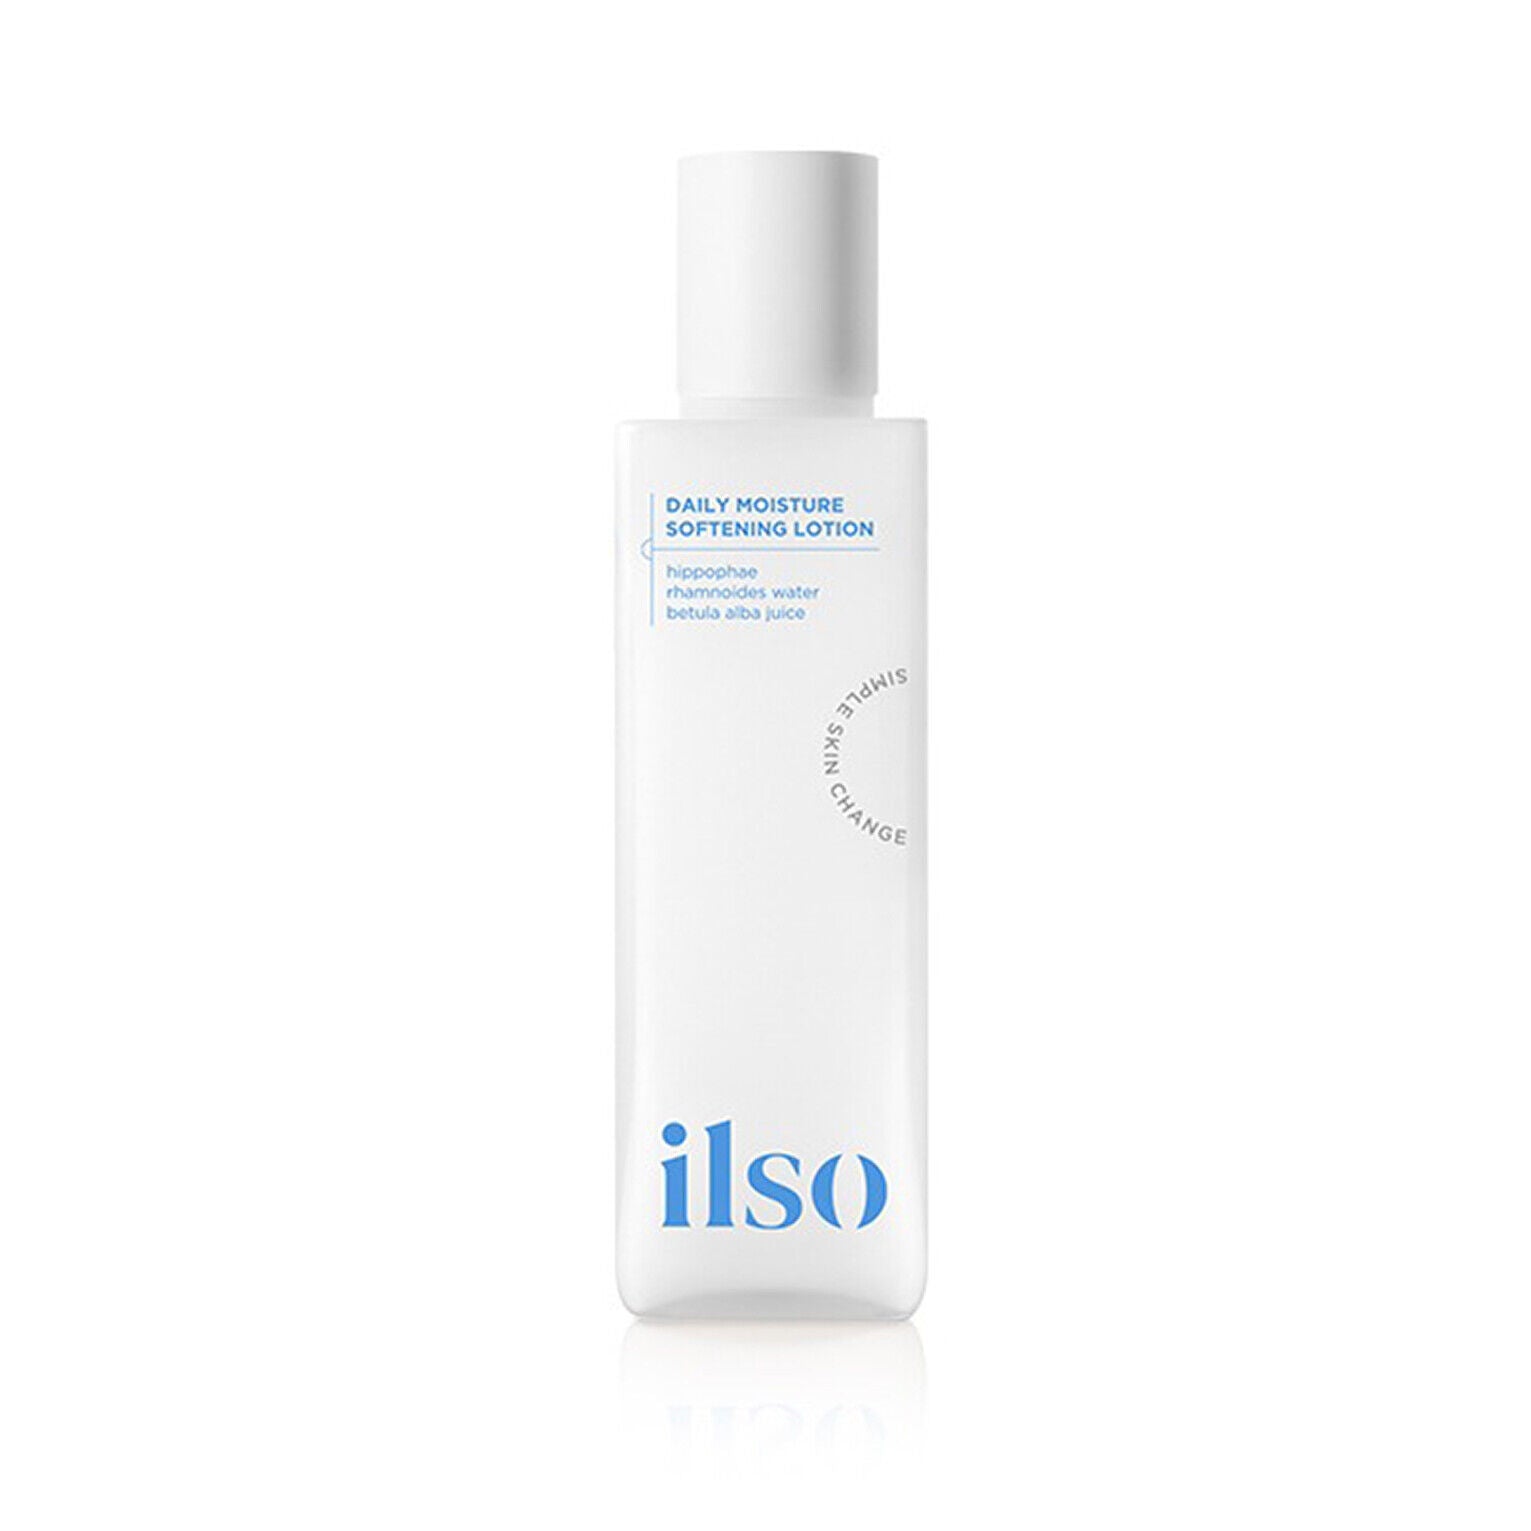 ILSO - Daily Moisture Softening Lotion